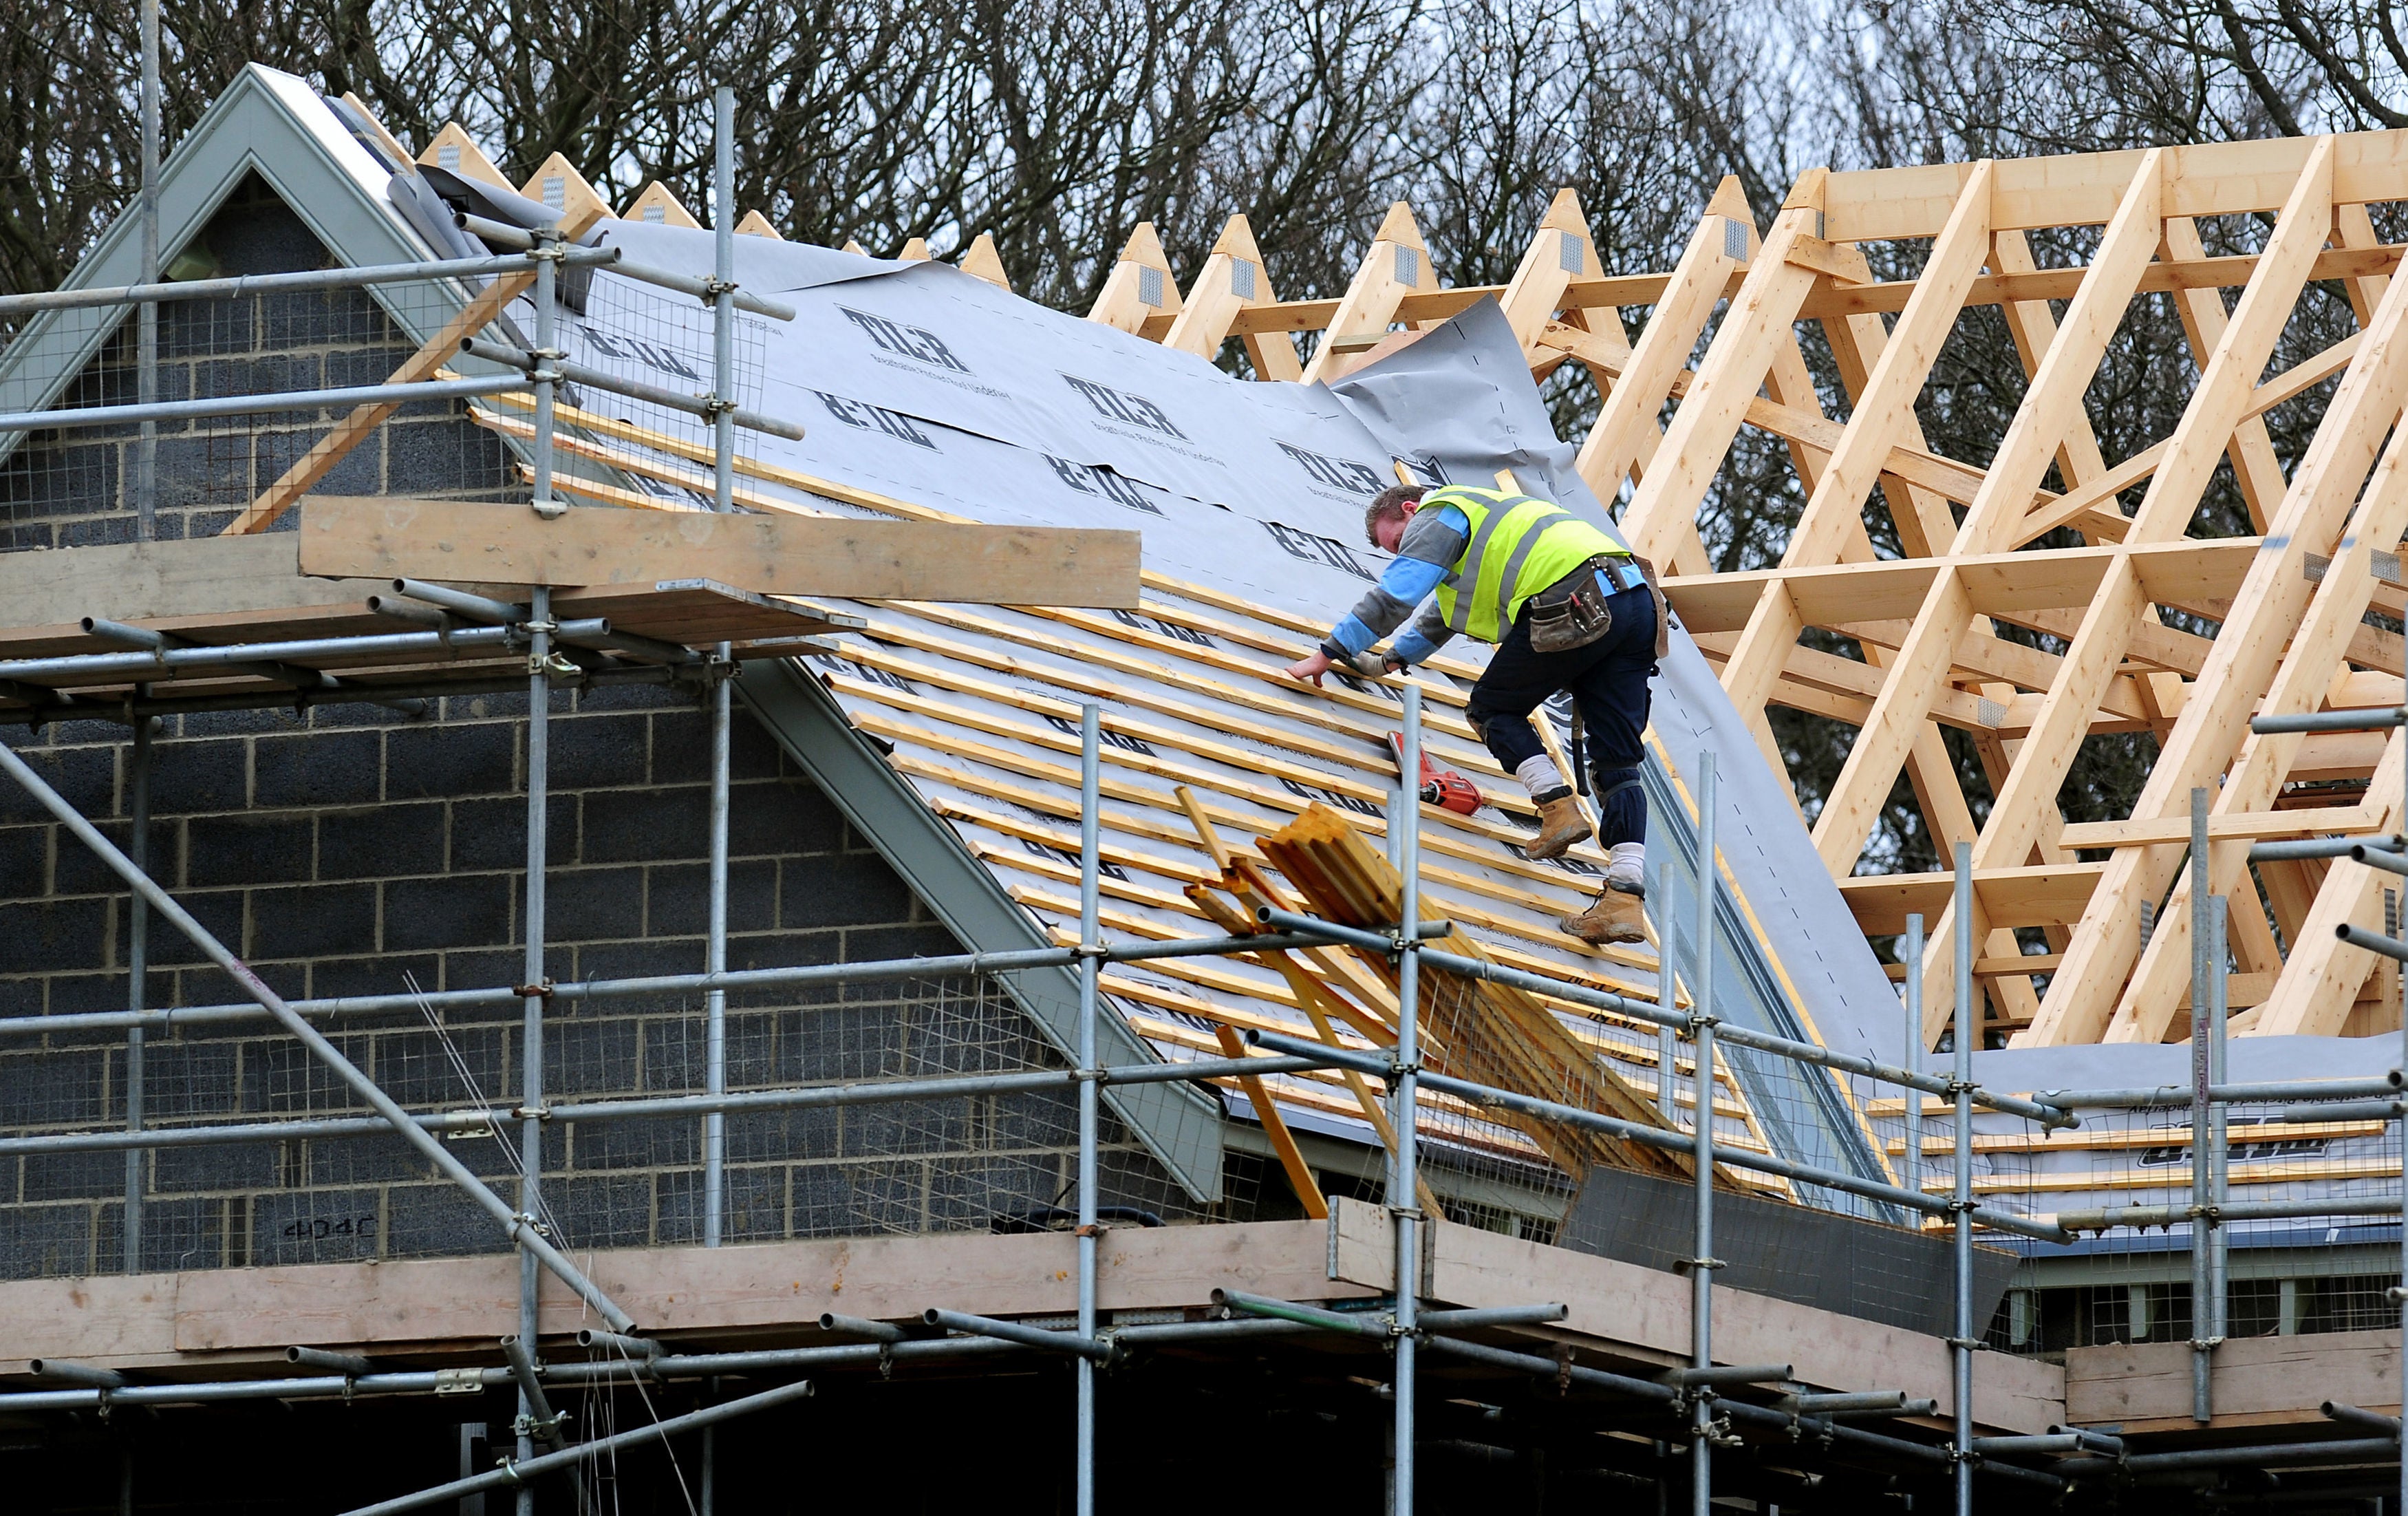 Data suggests persistent shortages are eating into growth in construction